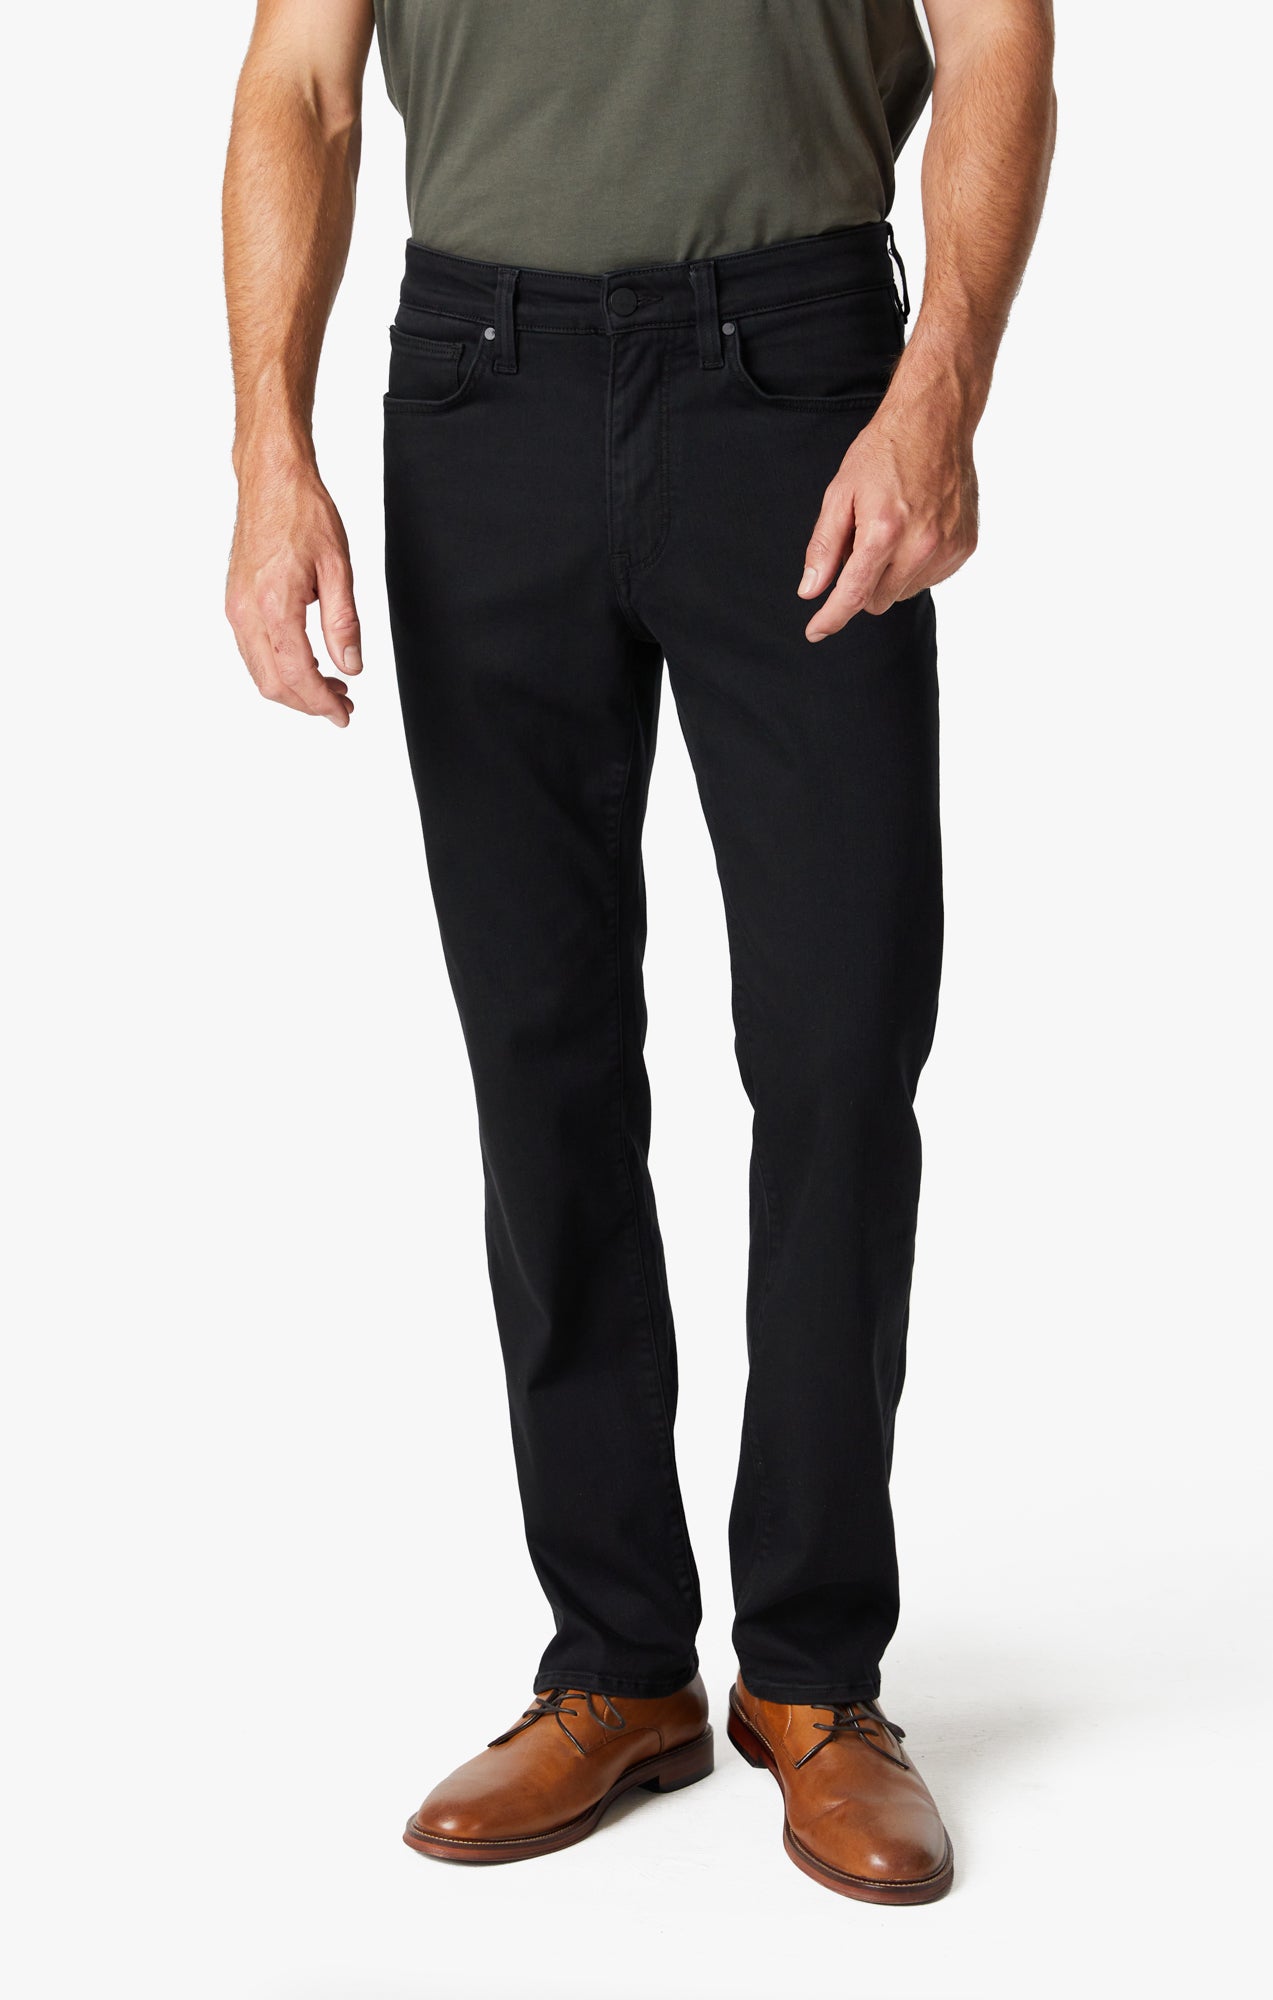 Charisma Relaxed Straight Leg Jeans In Black Urban Image 2